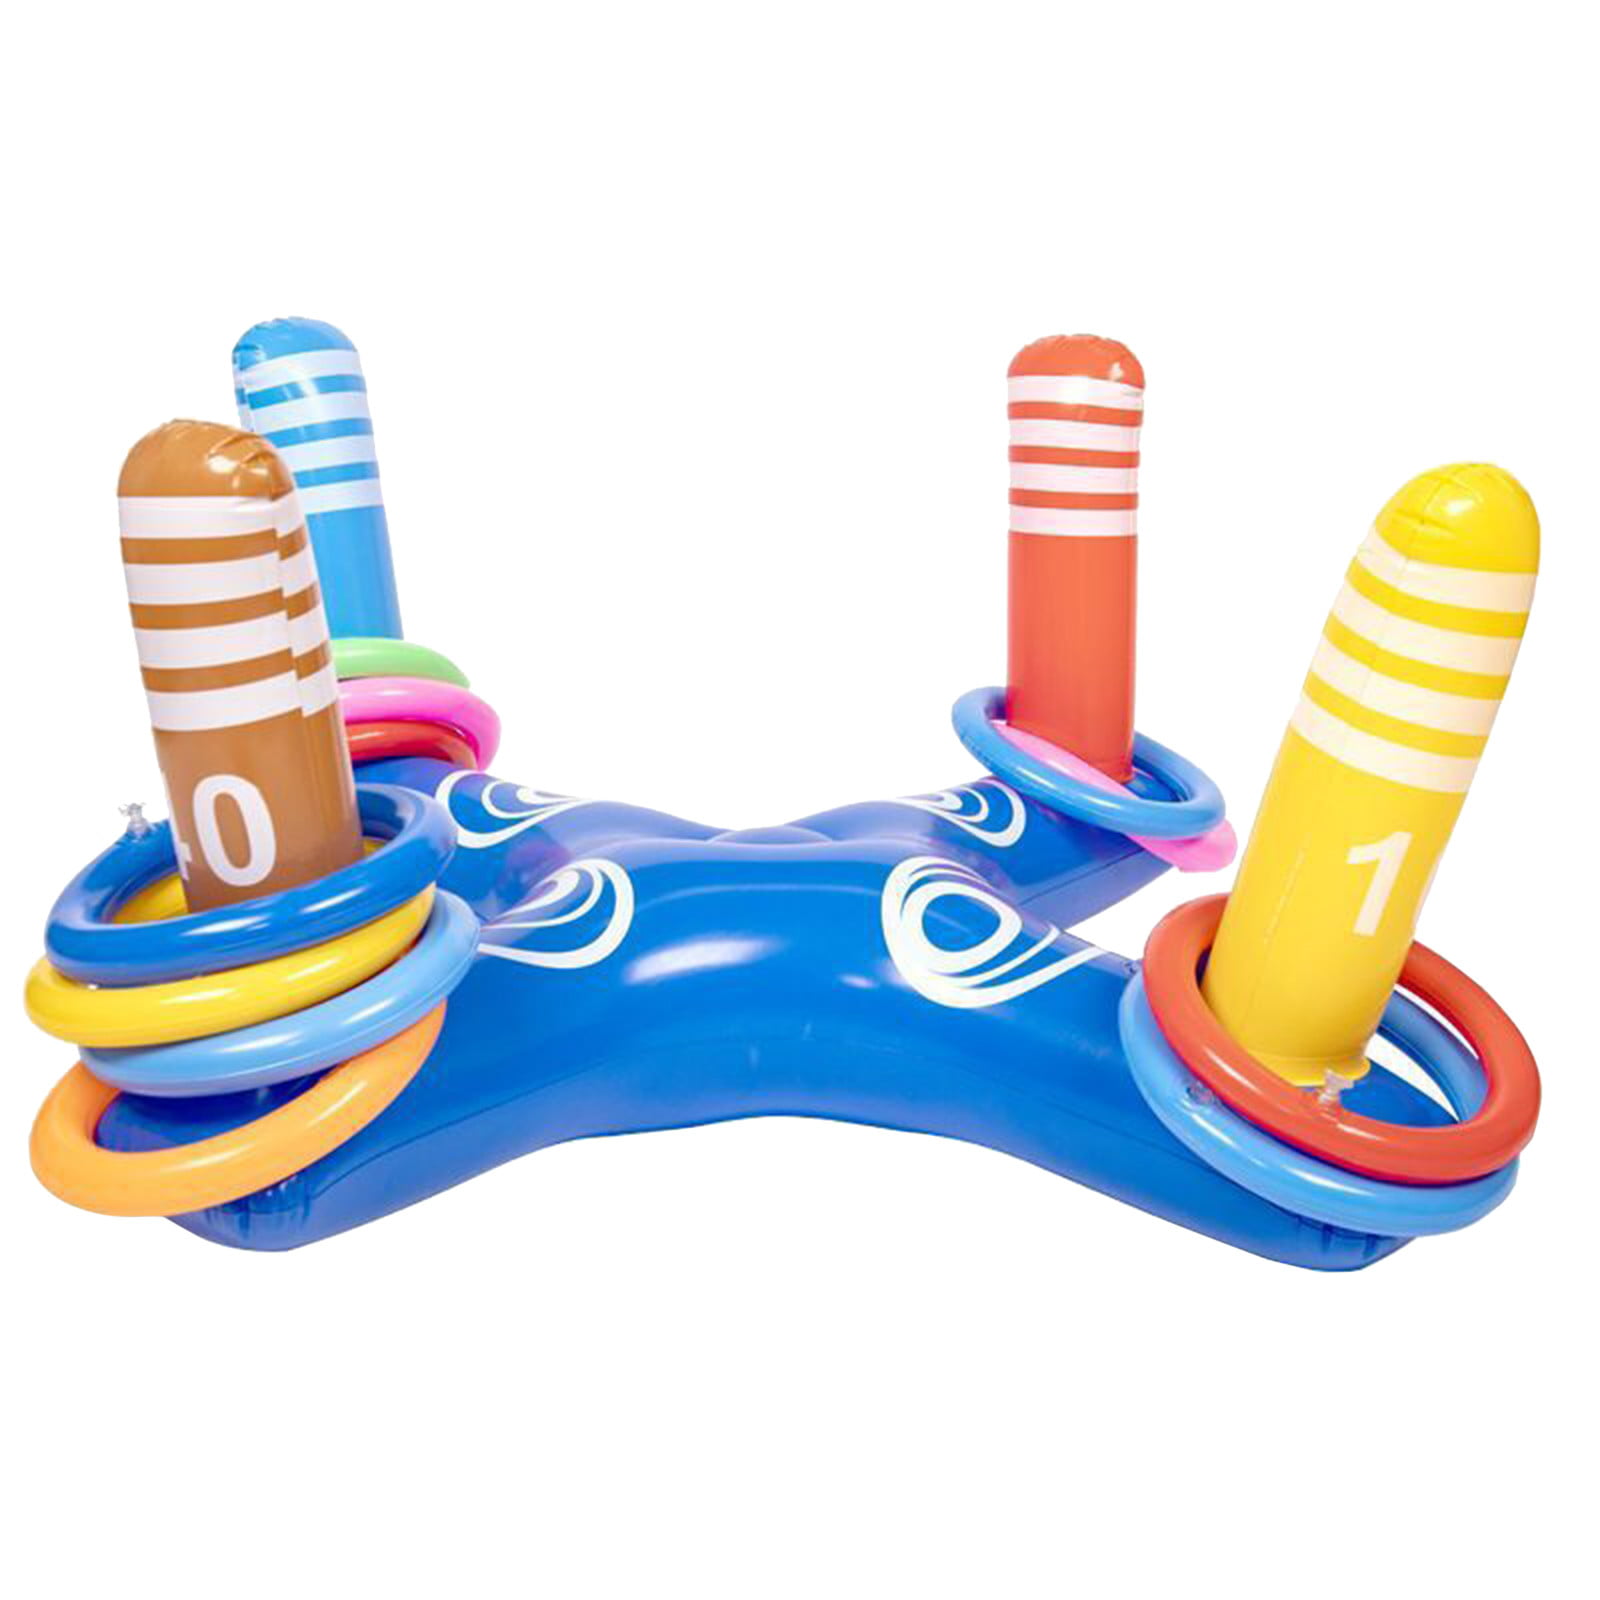 Inflatable Ring Toss Toy Set Floating Swimming Pool Toy With 4 Pcs Rings 